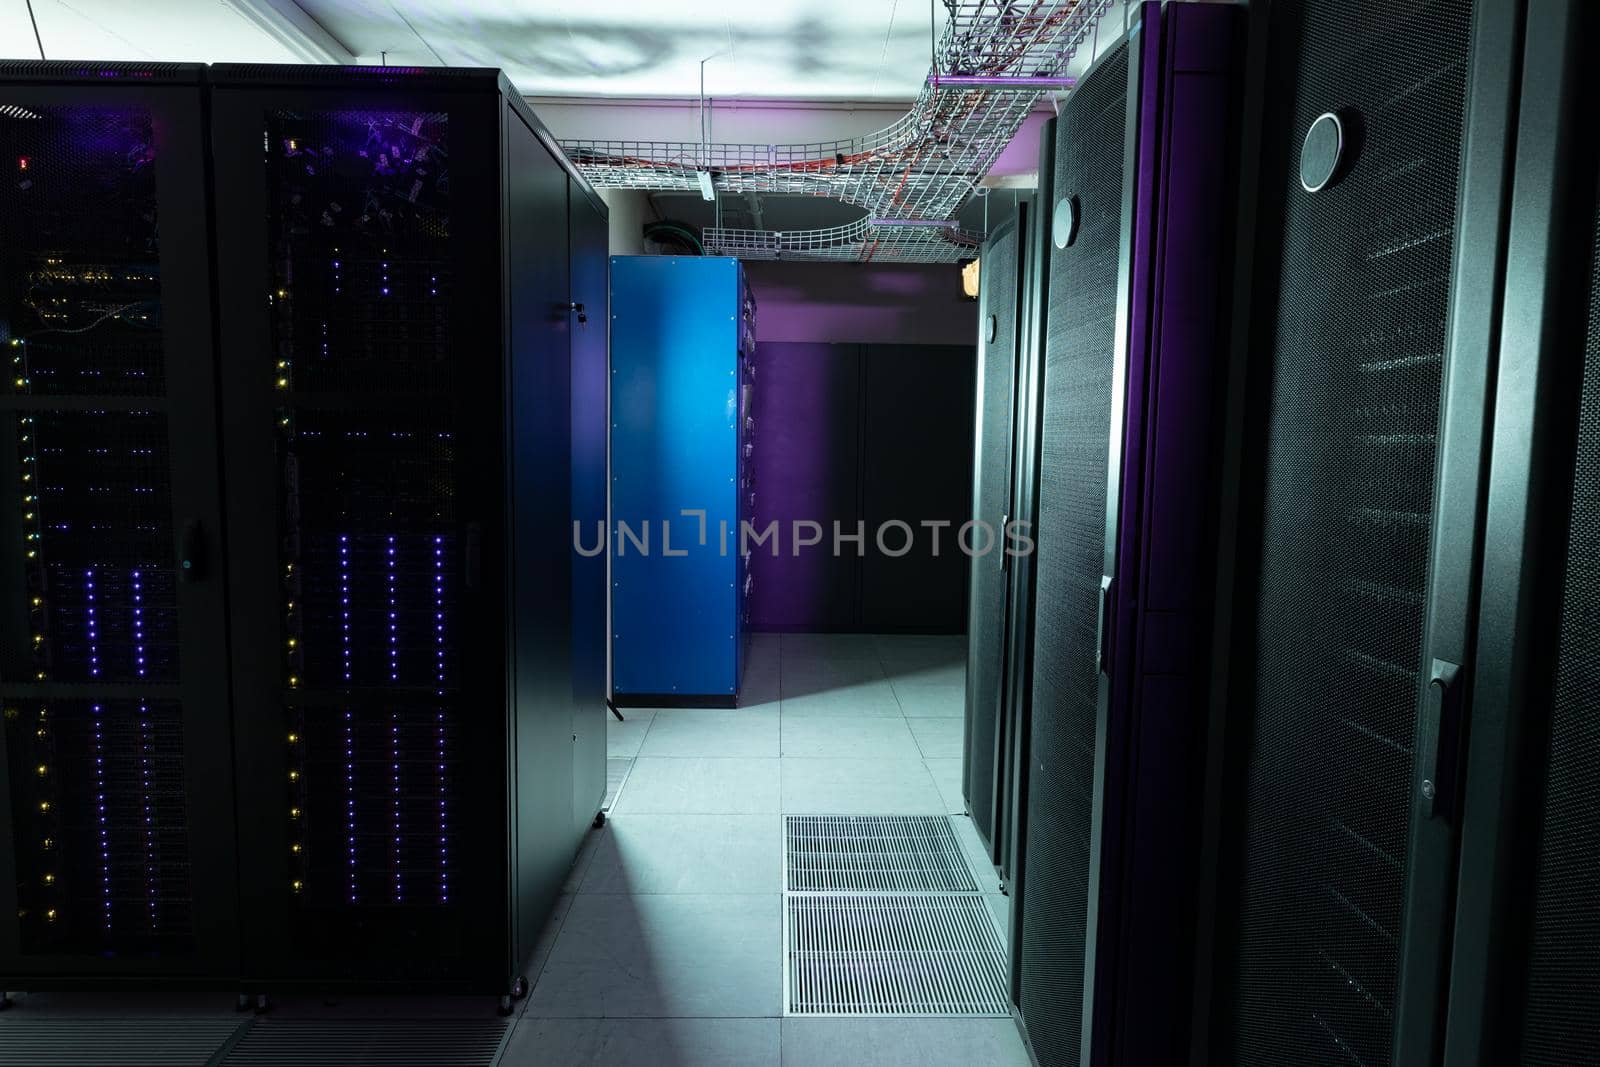 Data center with multiple rows of fully operational server racks by Wavebreakmedia